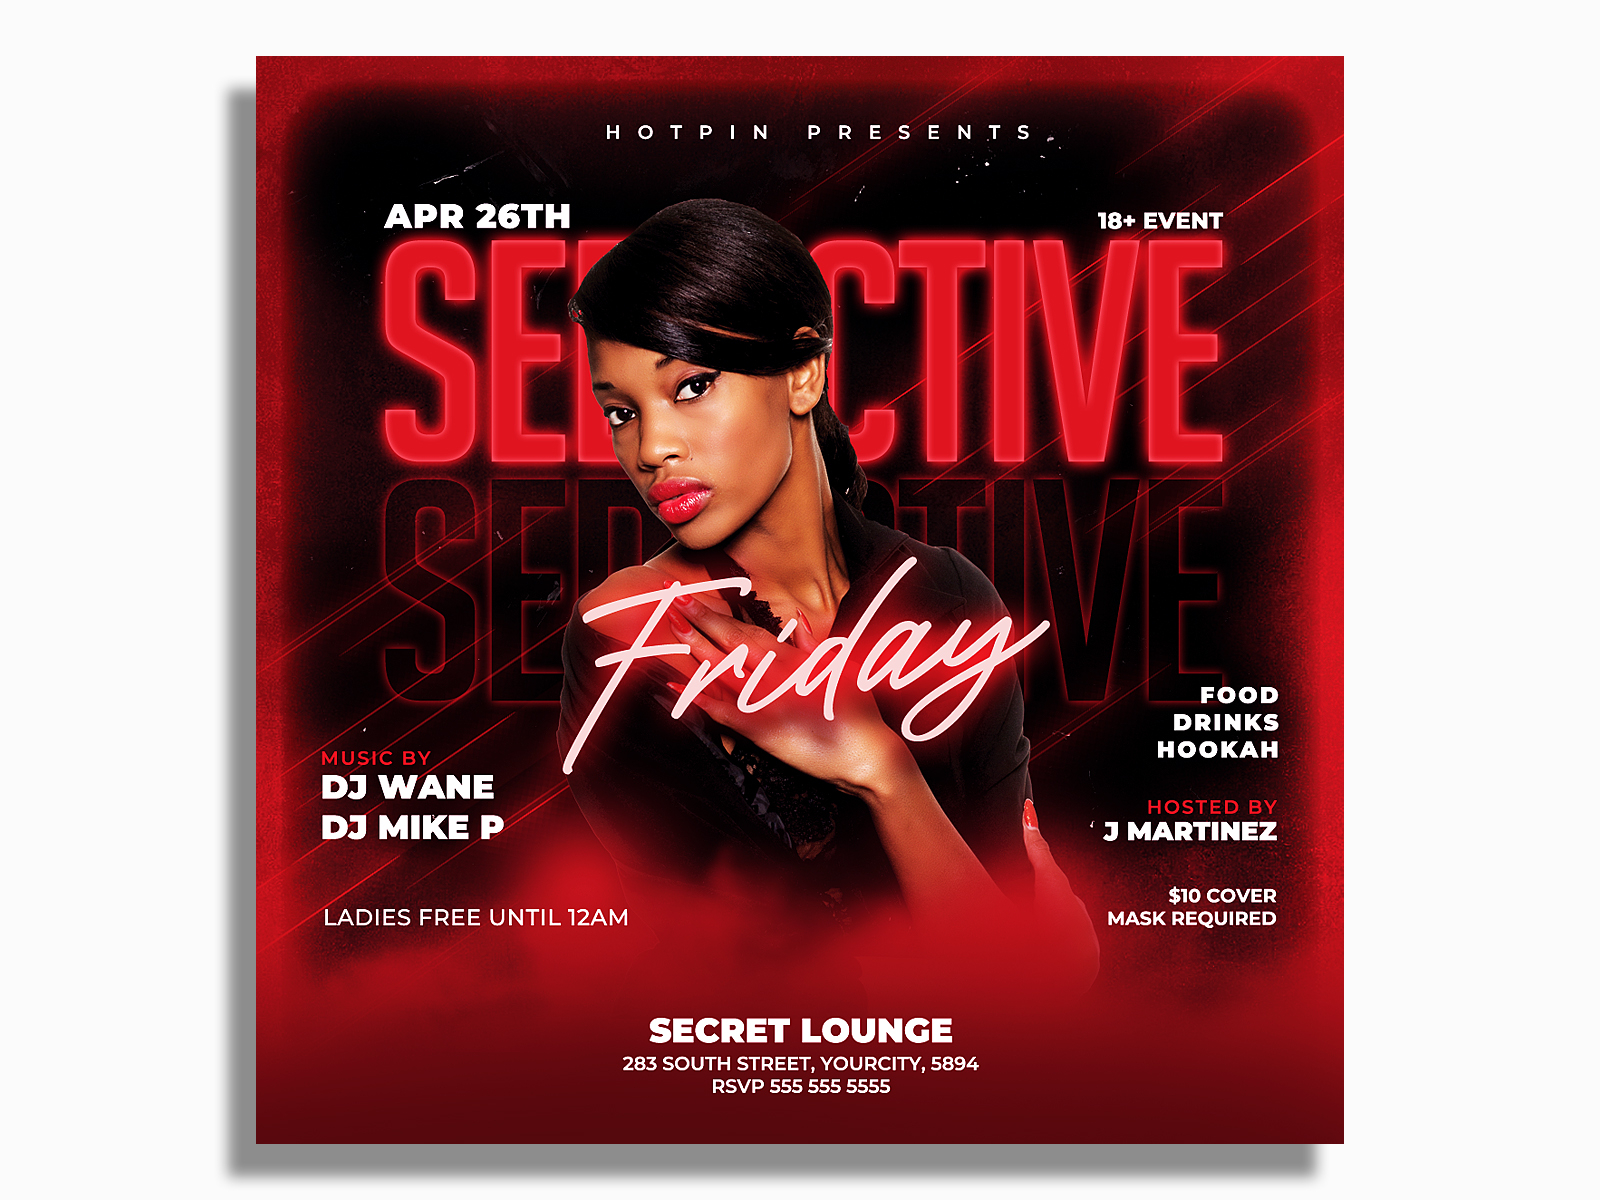 Night Club Party Flyer Template By Hotpin On Dribbble